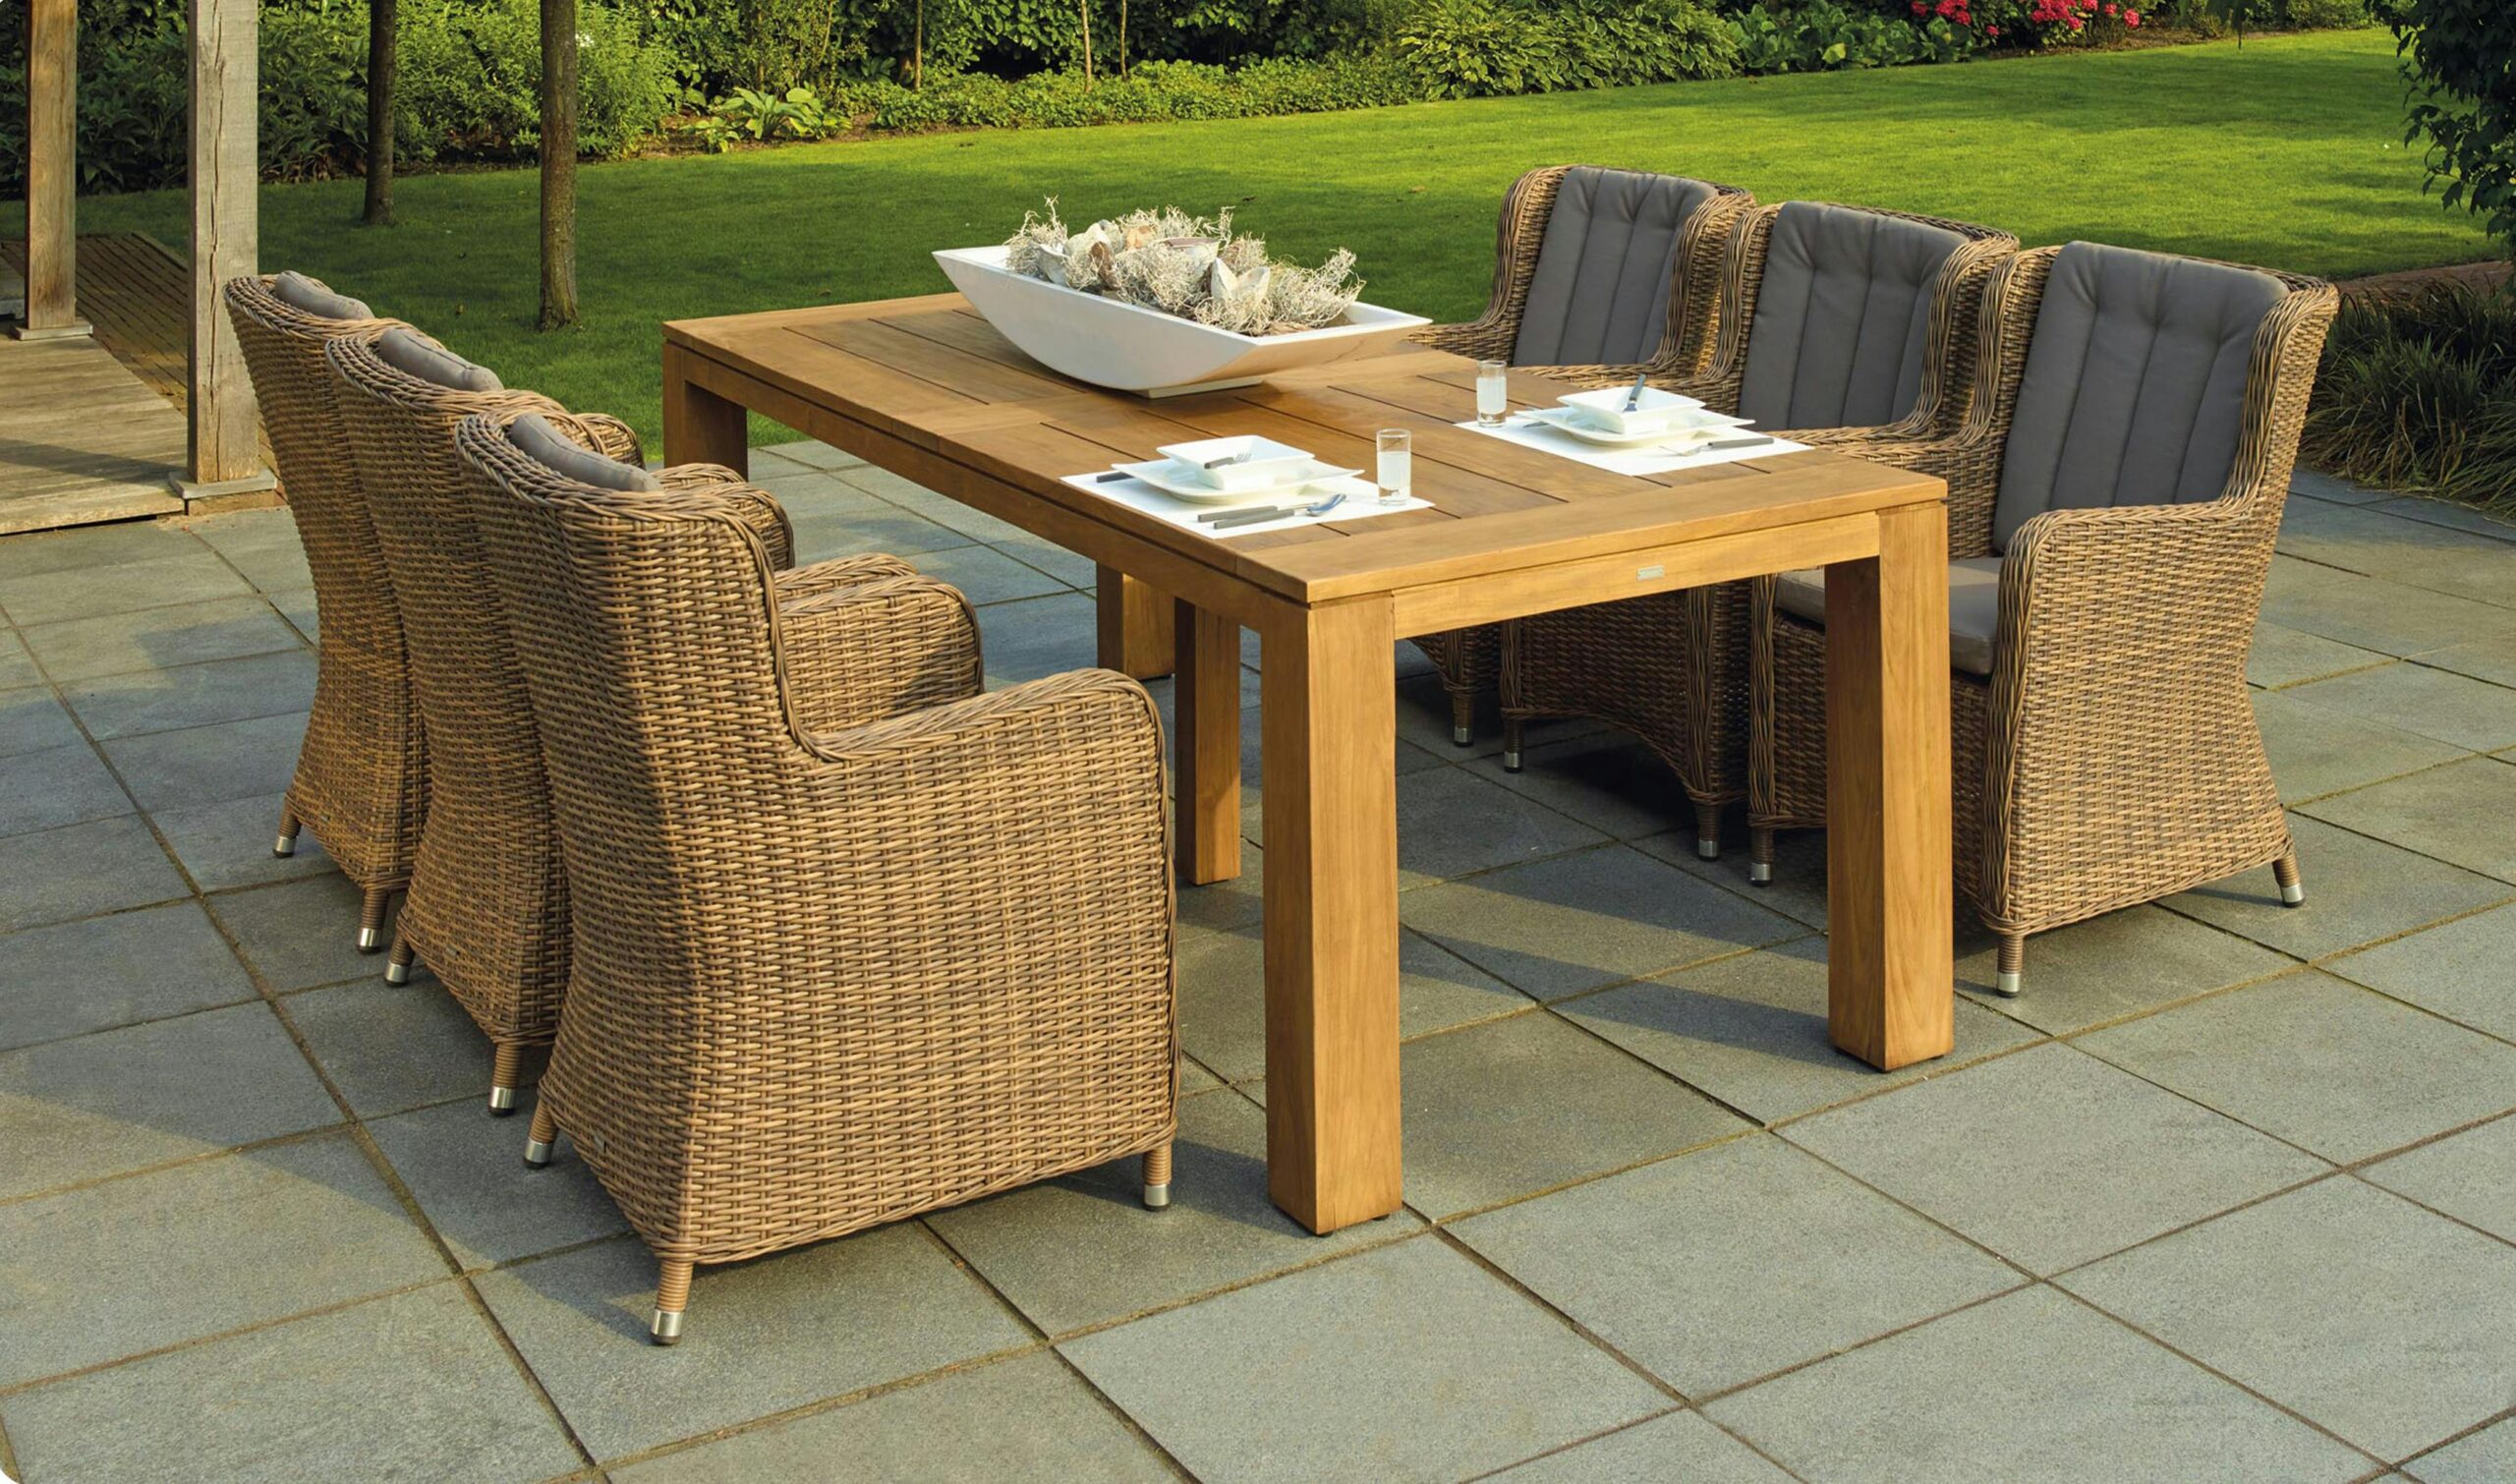 Relax in Your Backyard with a New Patio Set